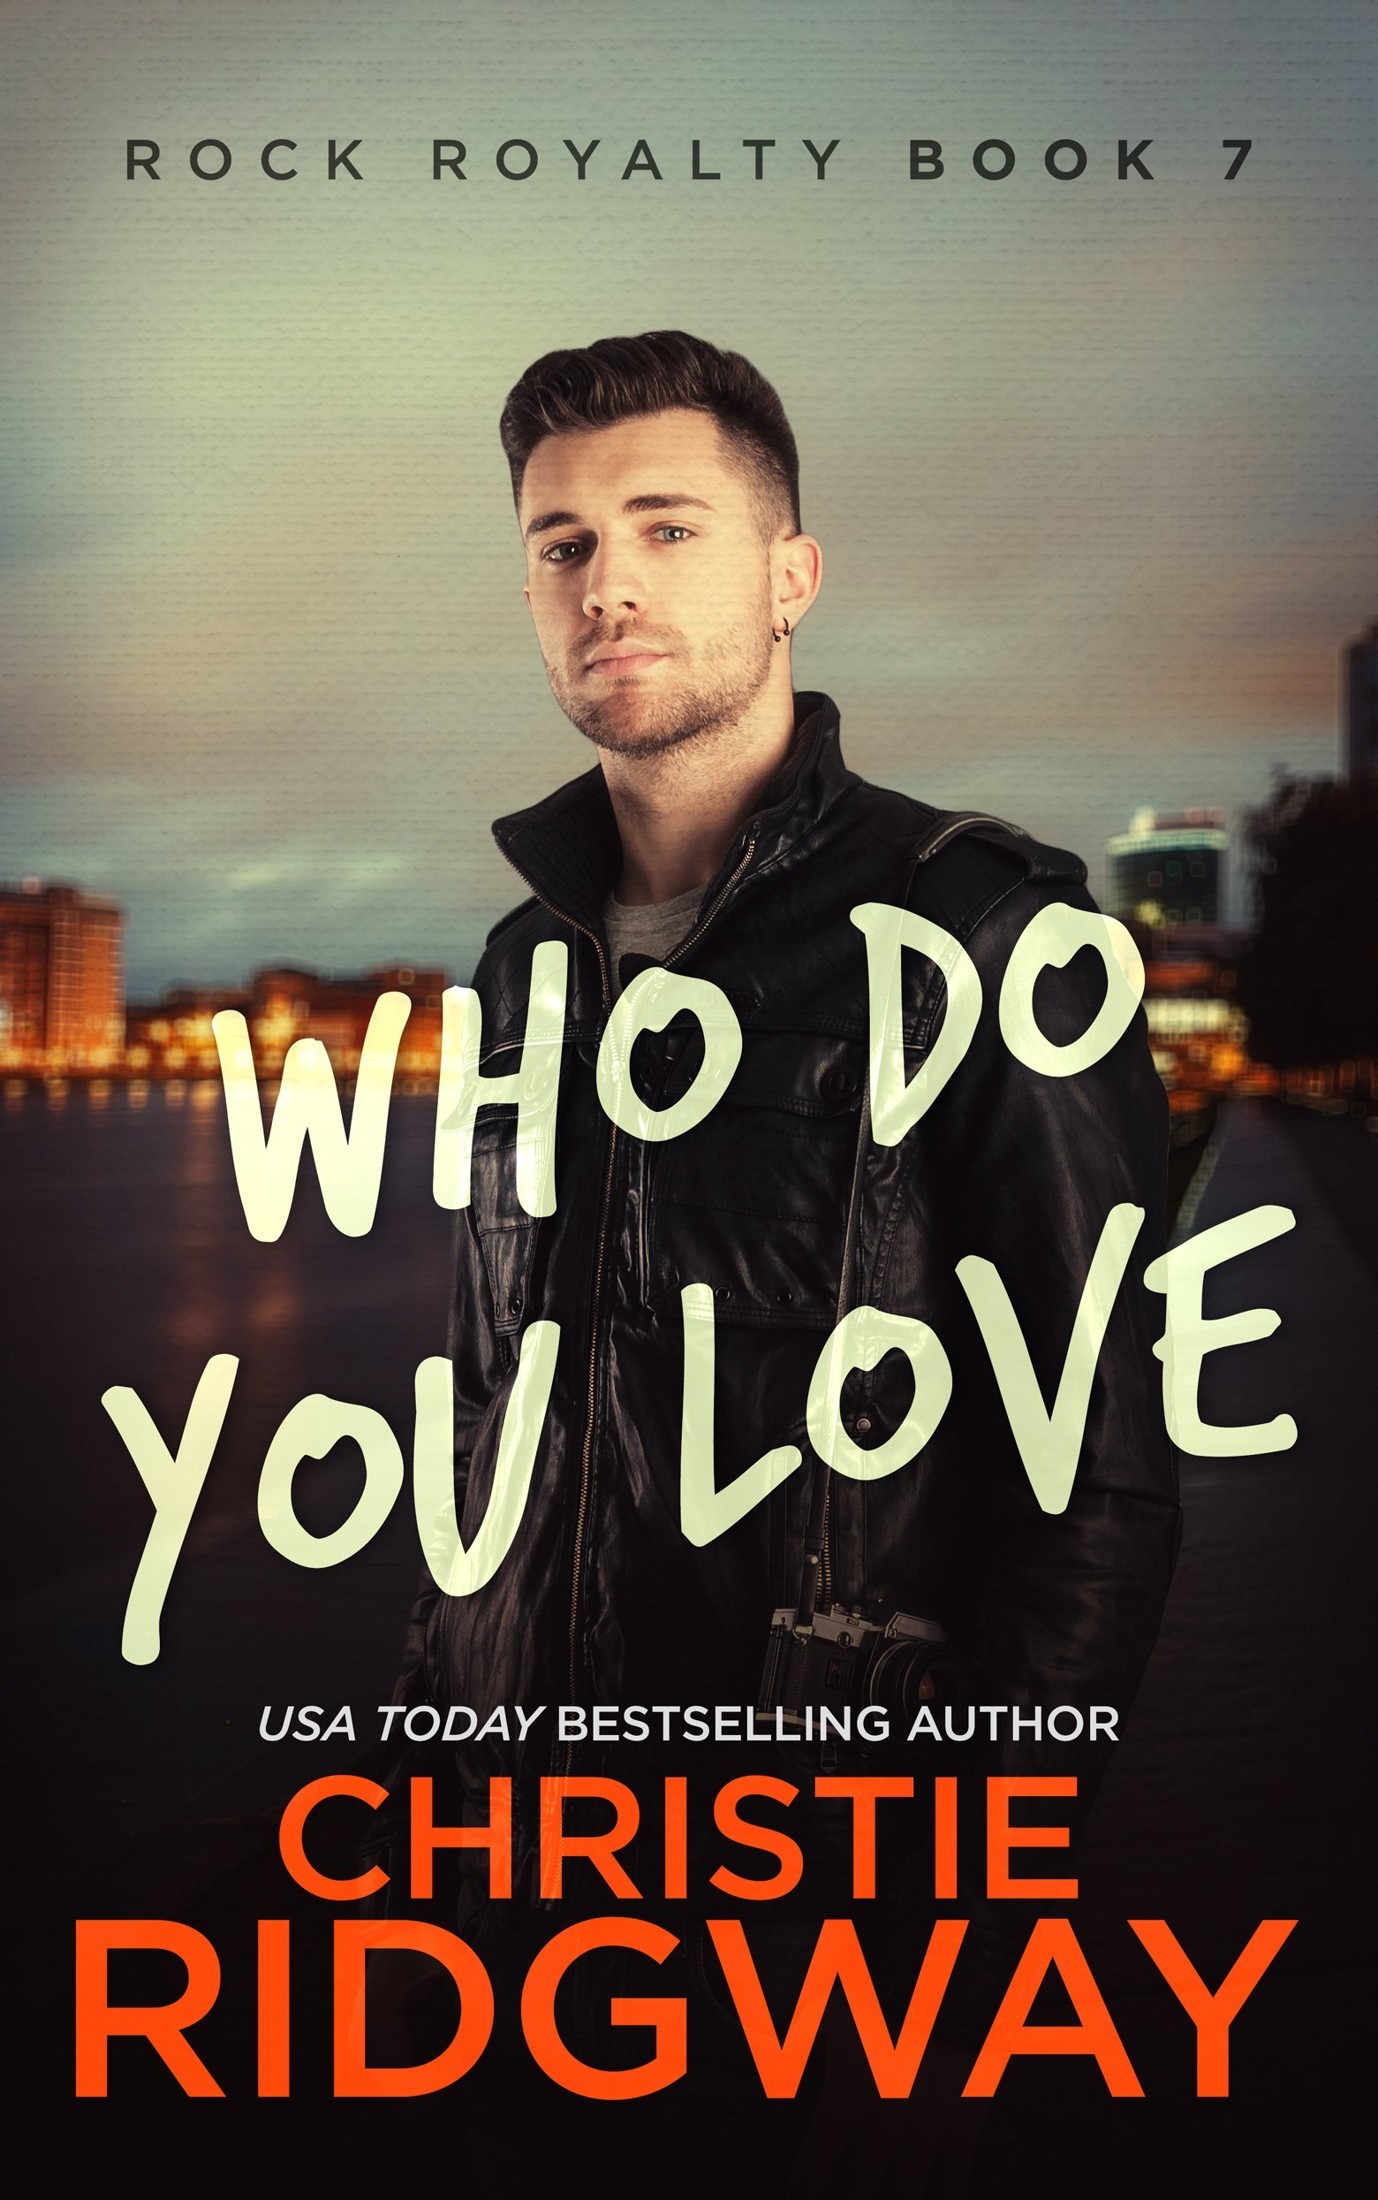 Who Do You Love (Rock Royalty Book 7) by Christie Ridgway